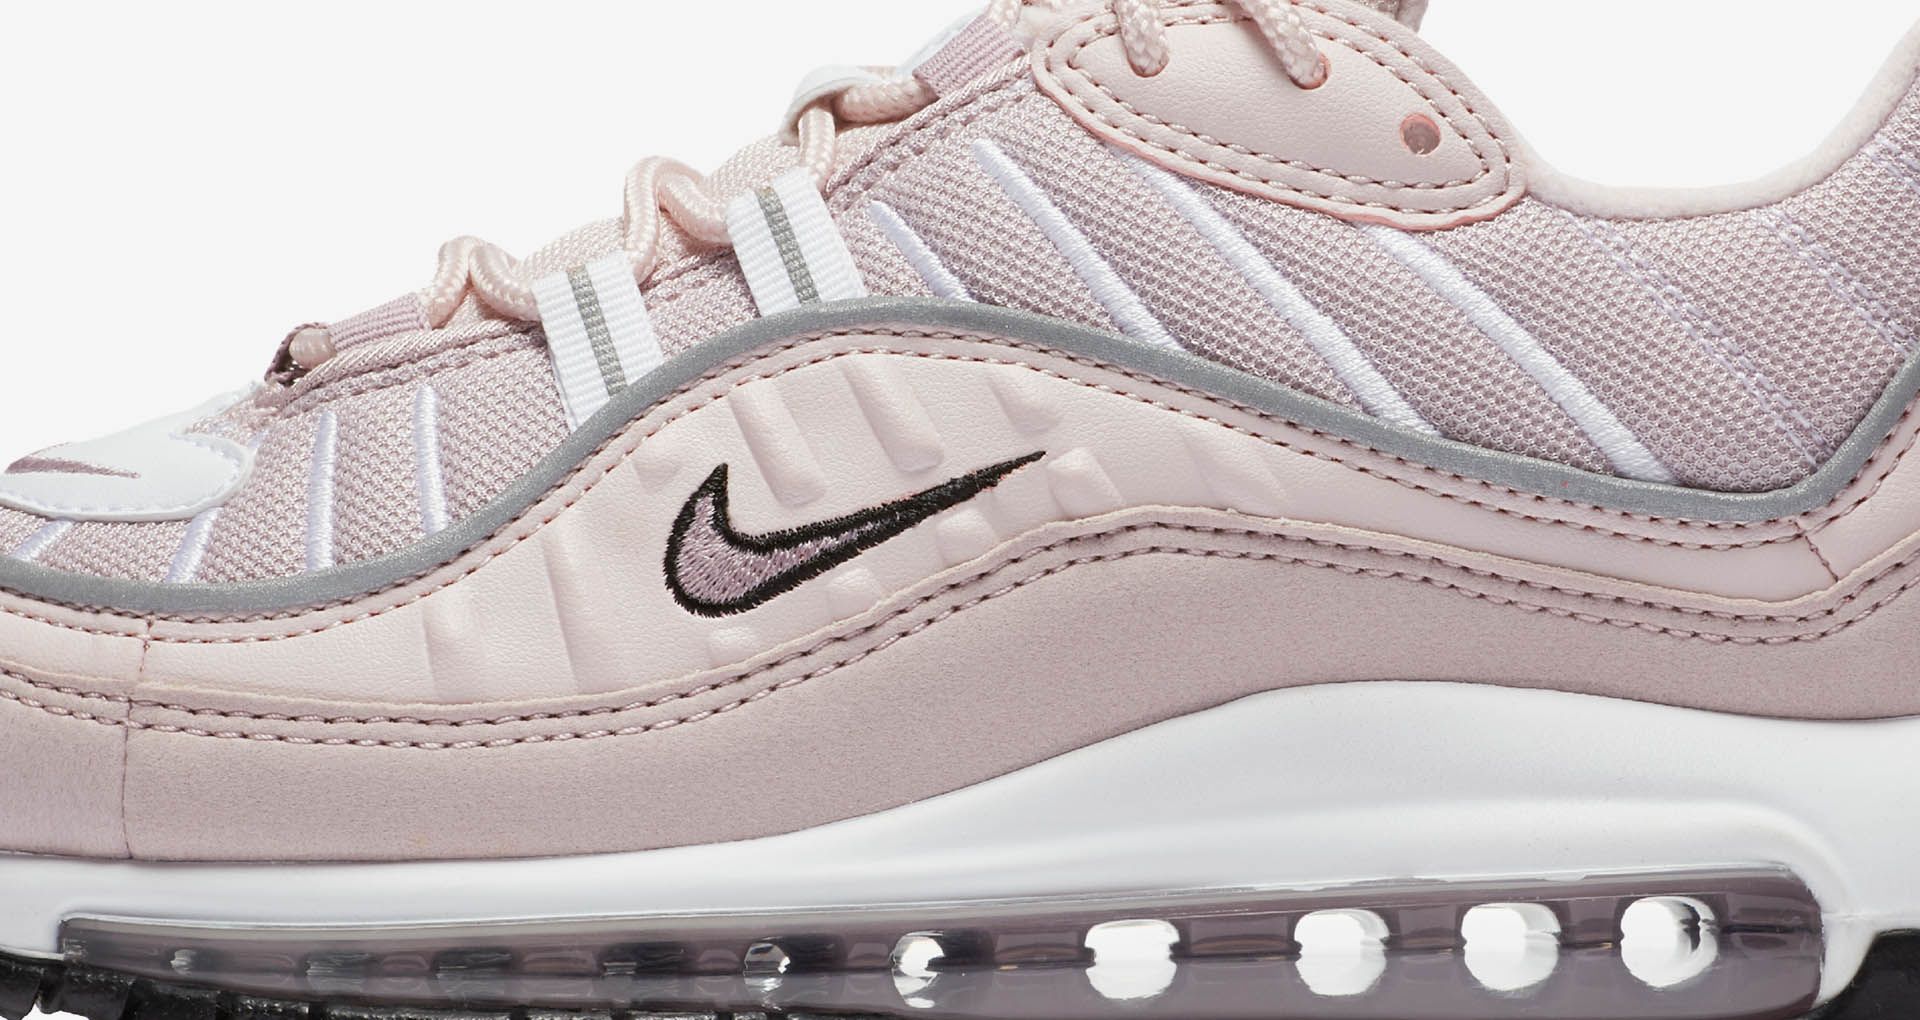 Nike Women's Air Max 98 'Barely Rose & Reflect Silver' Release Date ...